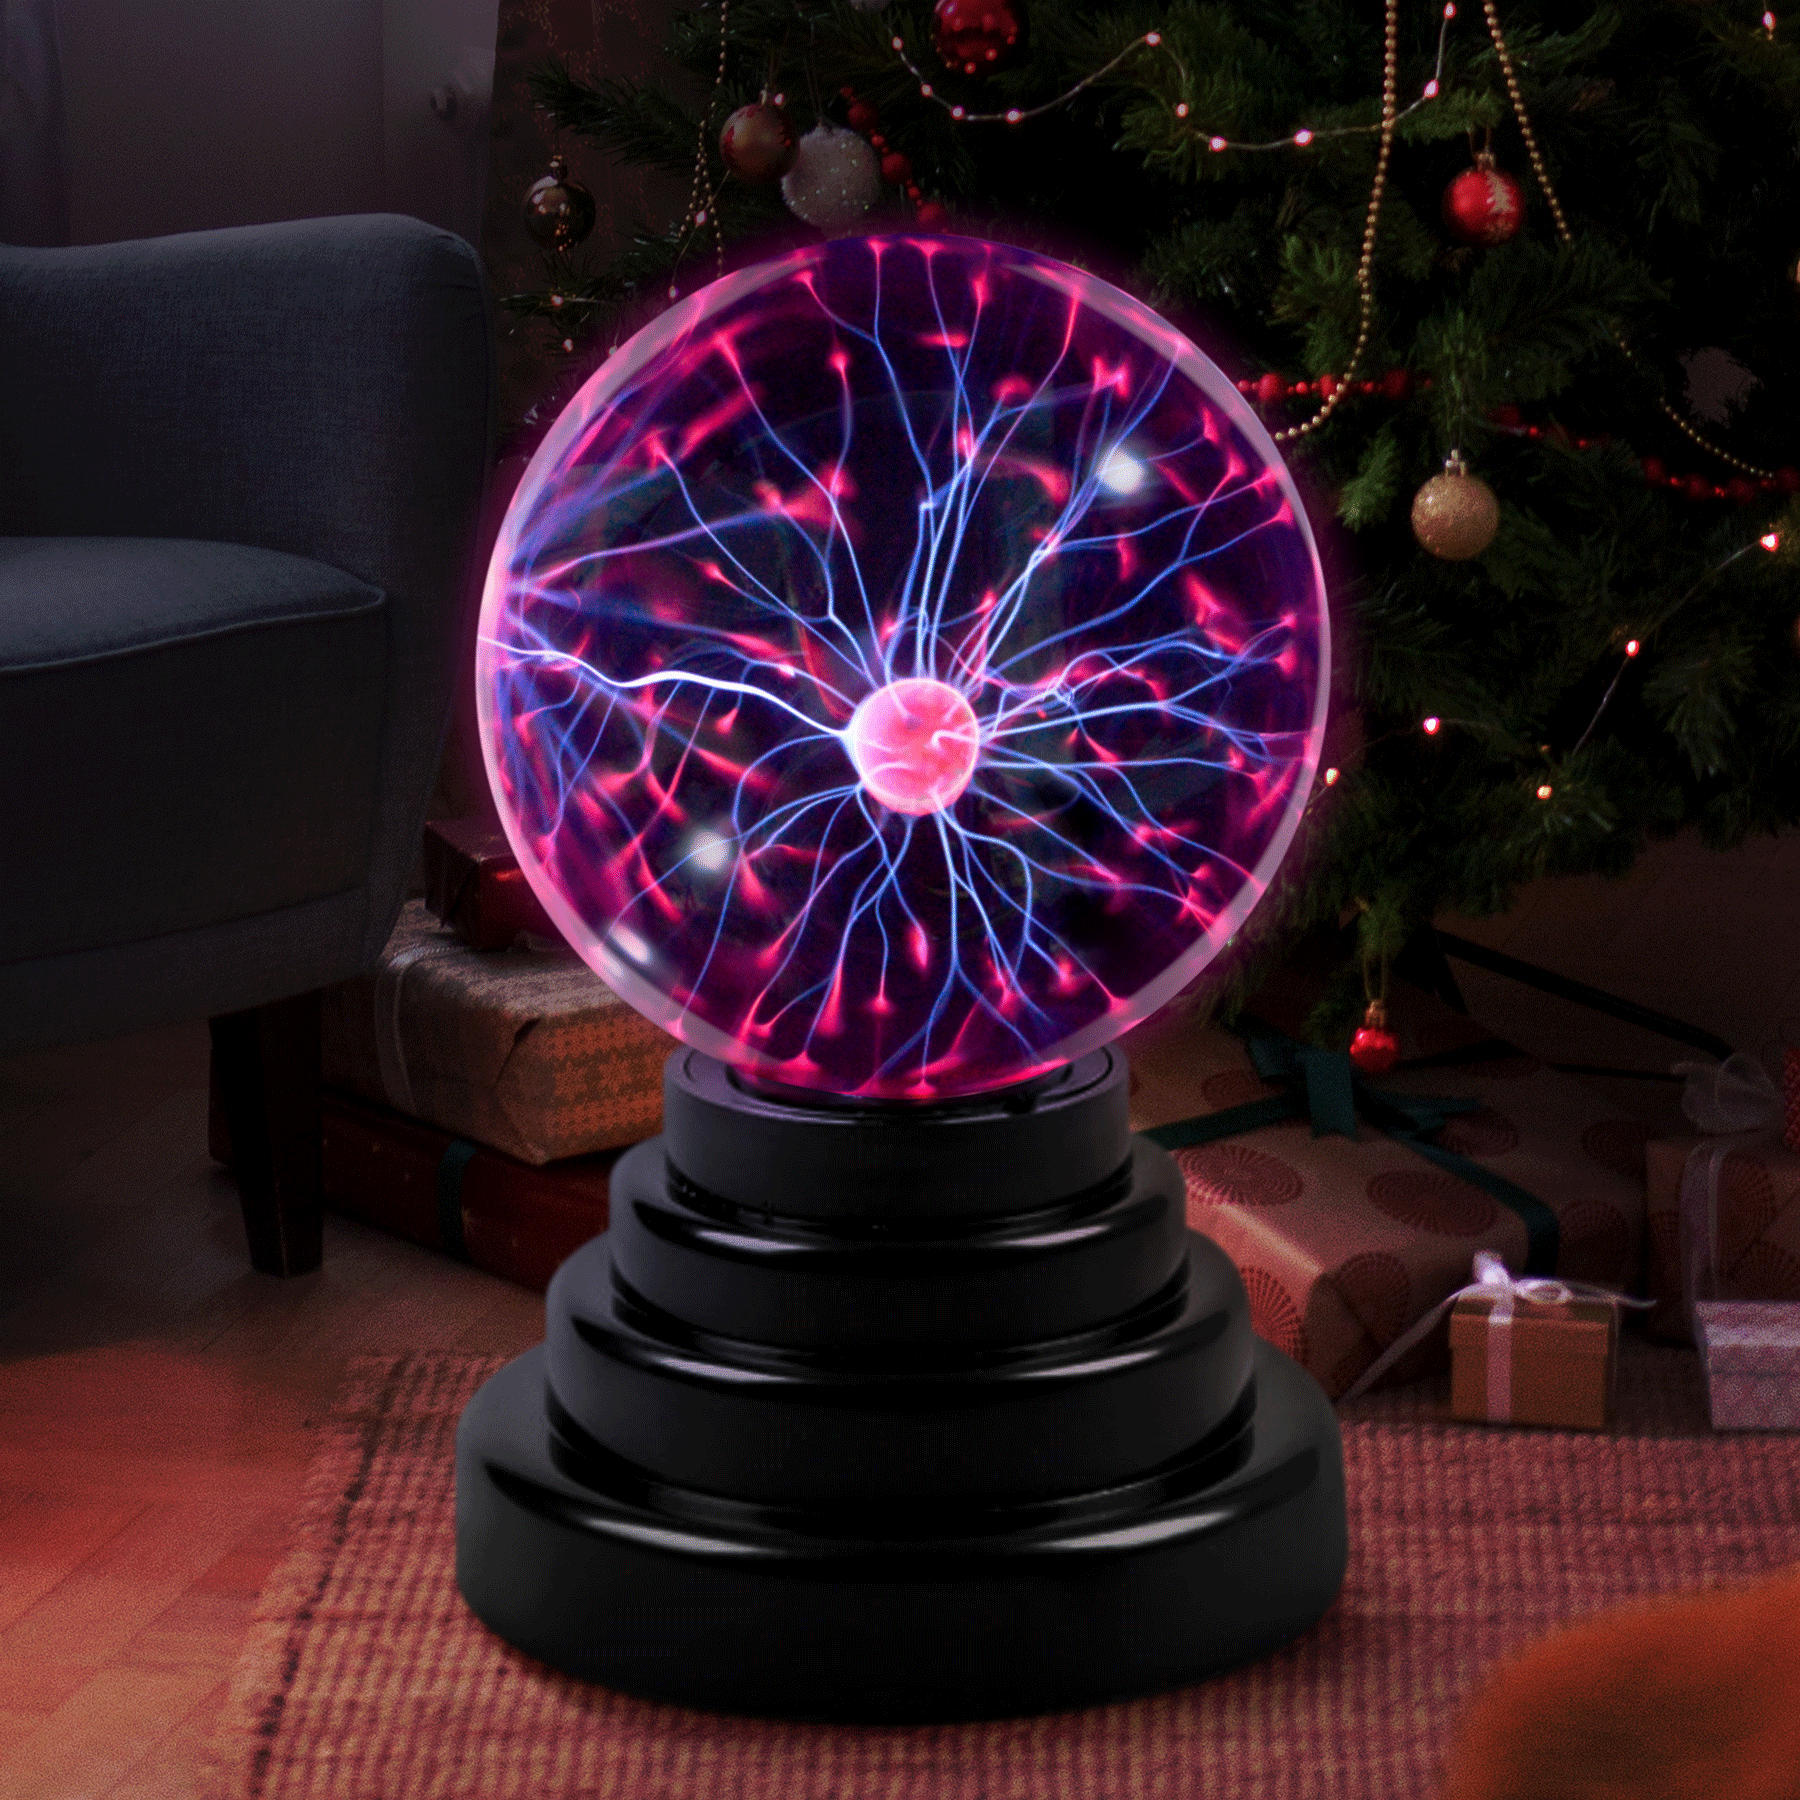 Katzco 7 Plasma Ball - Nebula Sphere, Thunder Lightning - Plug-in  Electricity Ball - Touch and Sound Sensitive Plasma Globe for Parties,  Decorations, Prop - STEM Science Toy for Kids - Cool Lamps 